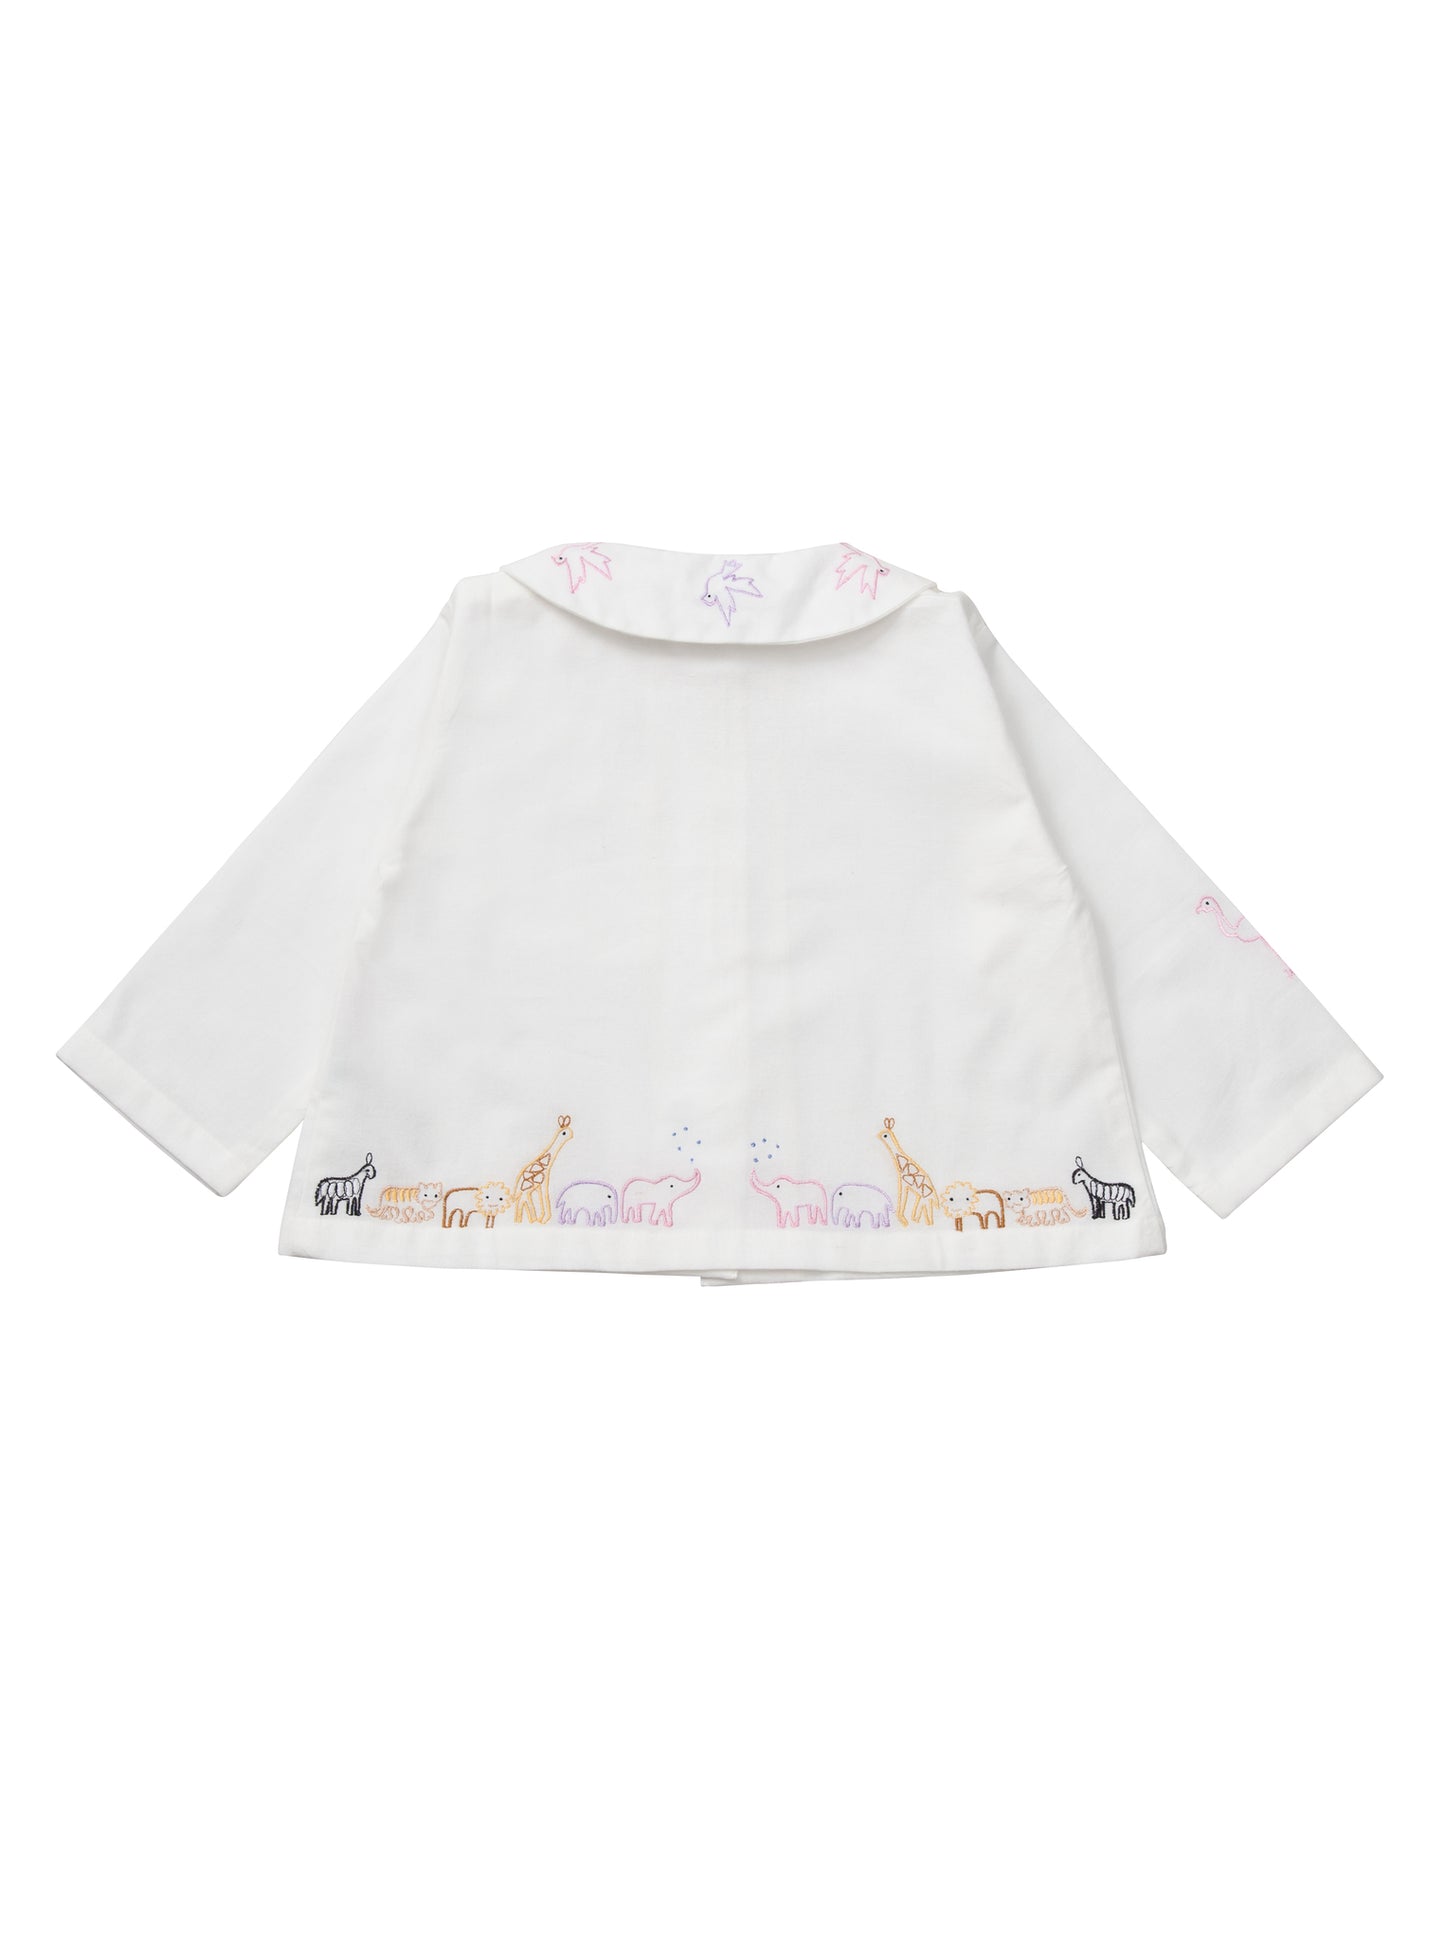 Traditionally styled white pyjamas, made in soft, brushed cotton. The top has lovely colourful animal embroidery, a peter pan collar, chest pocket and fastens with buttons on the front. The matching trousers have an elasticated waist and embroidery above the hem of the legs.